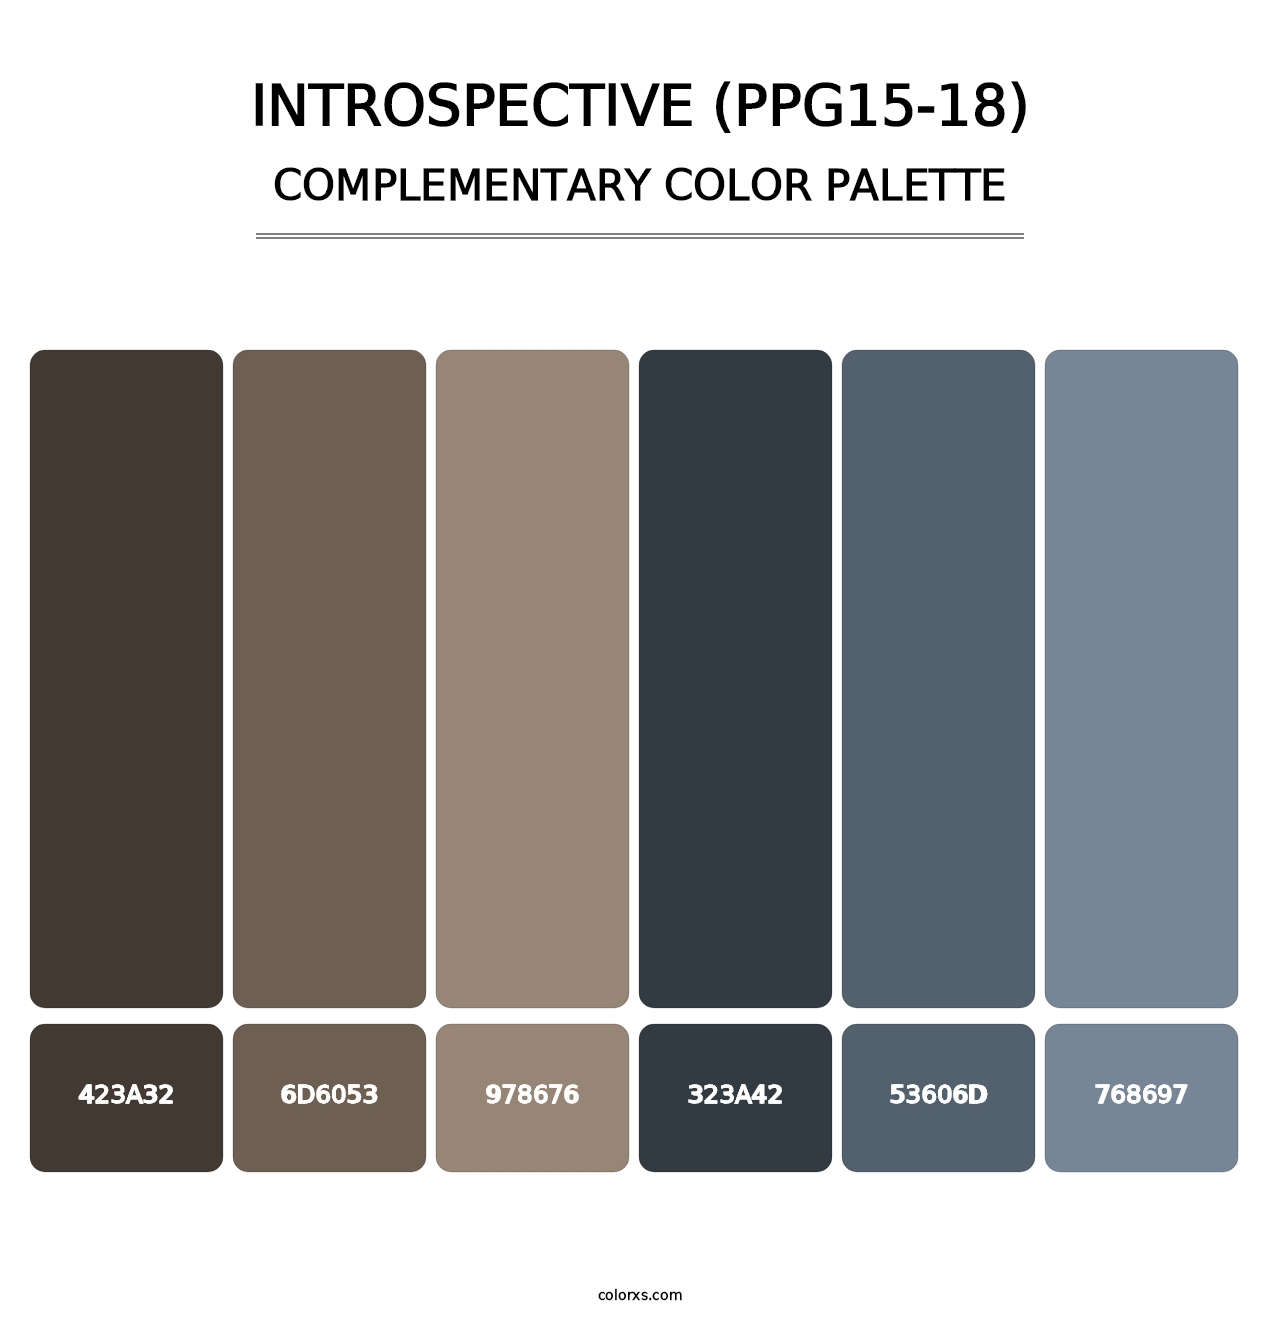 Introspective (PPG15-18) - Complementary Color Palette